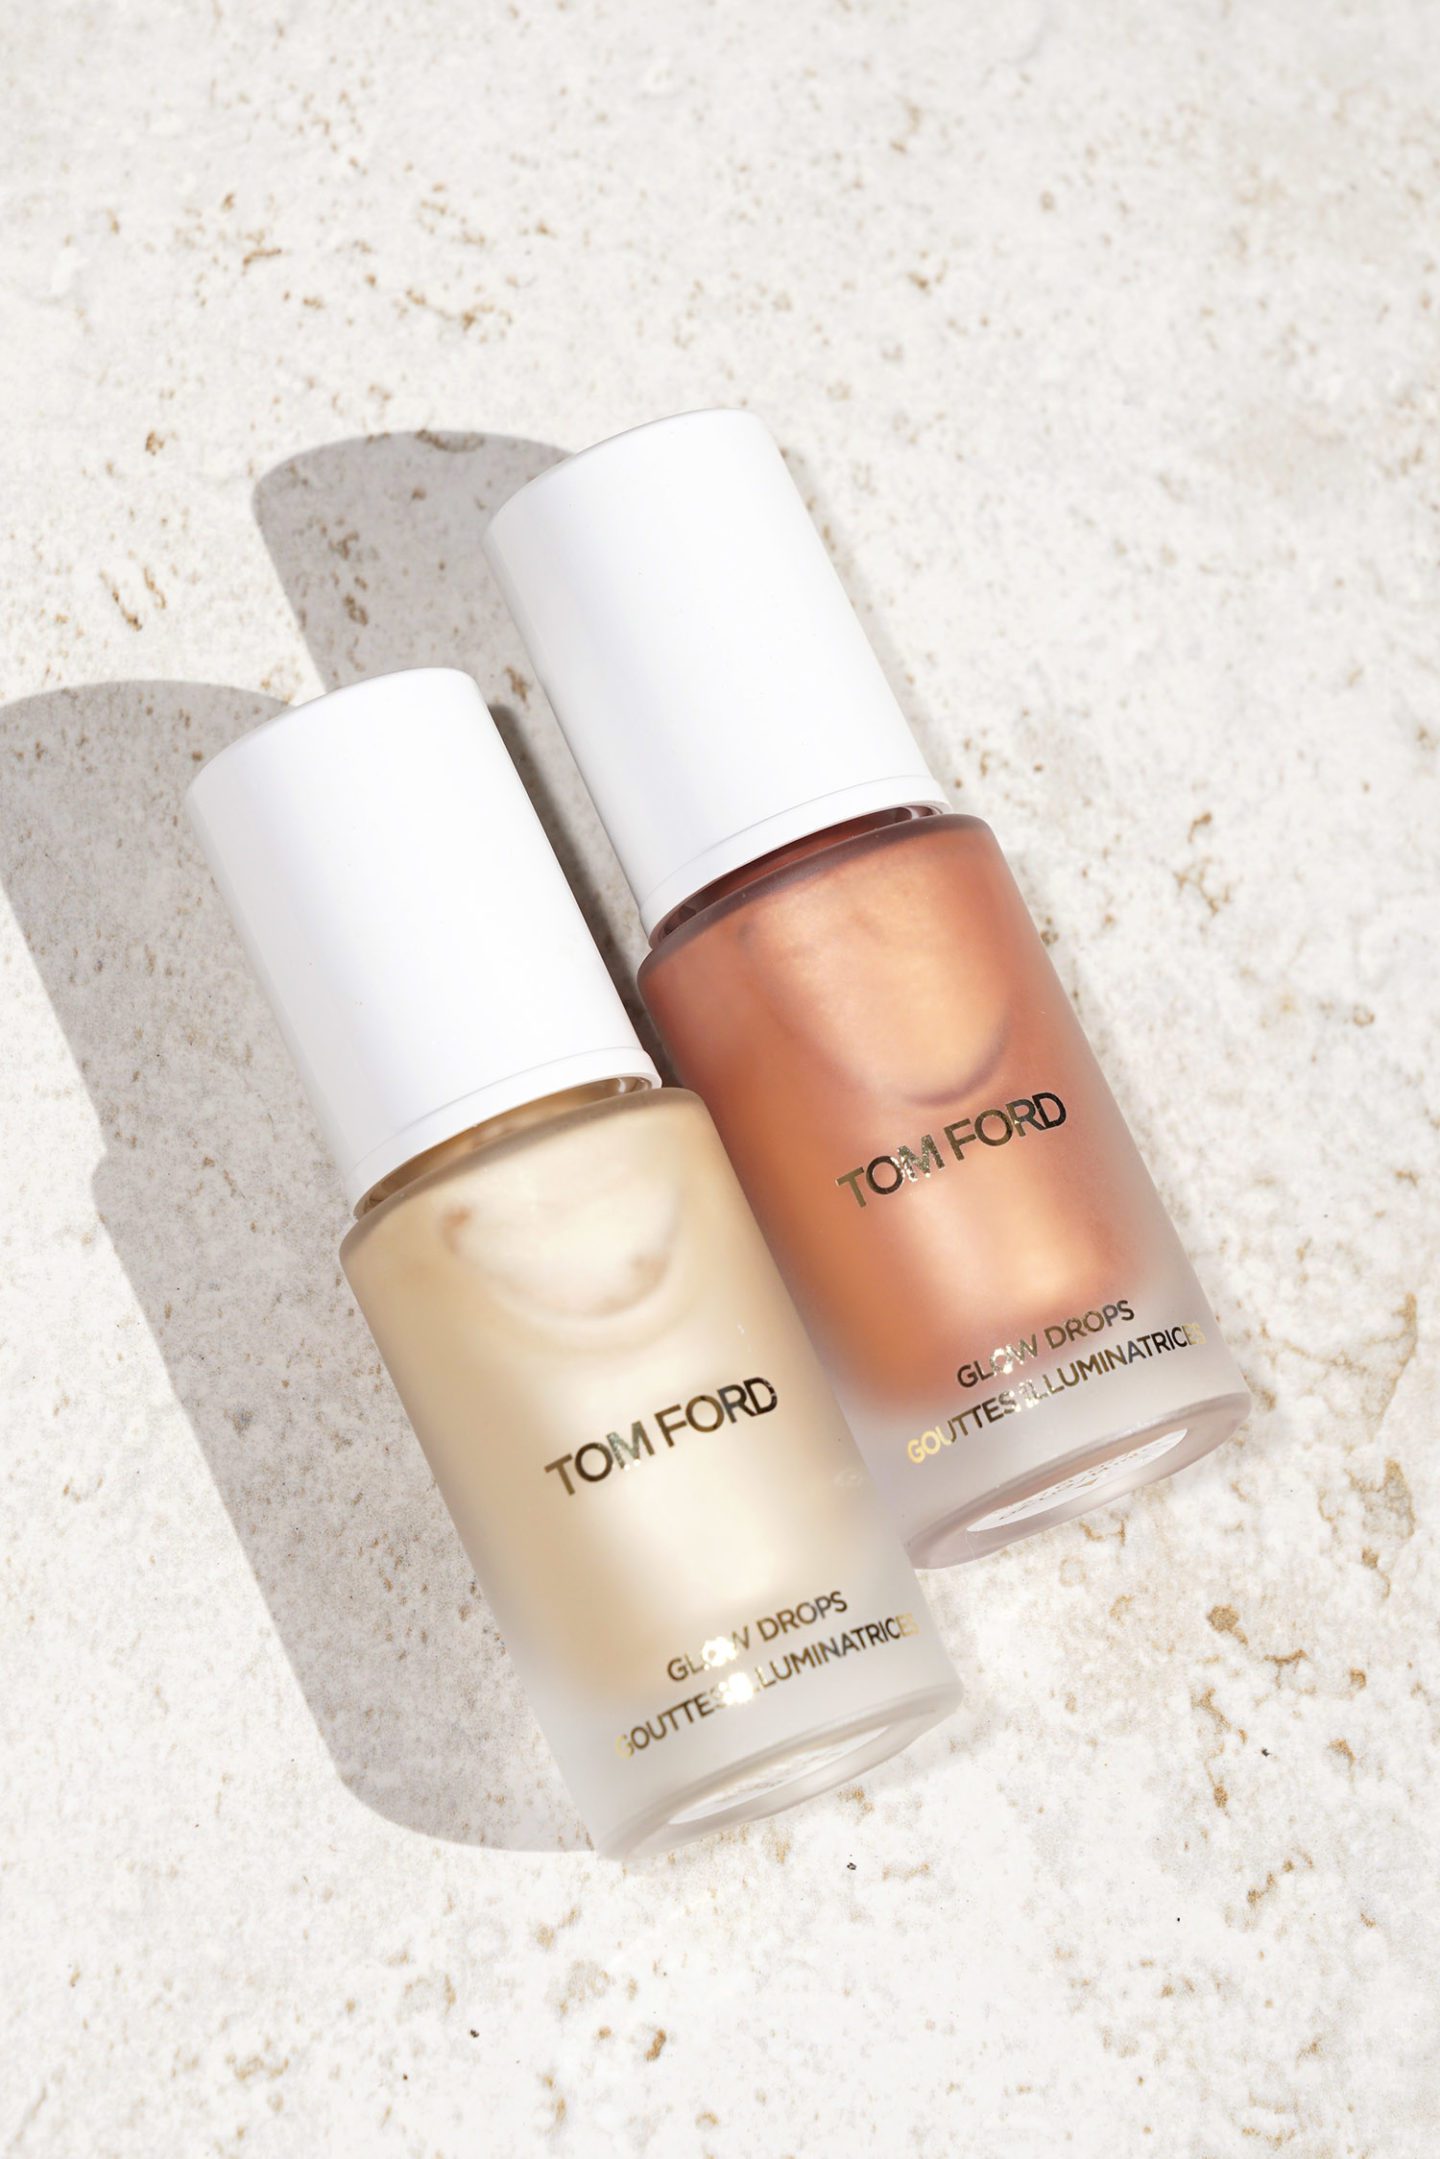 Tom Ford Glow Drops Reflects Gilt and Glacial Rose